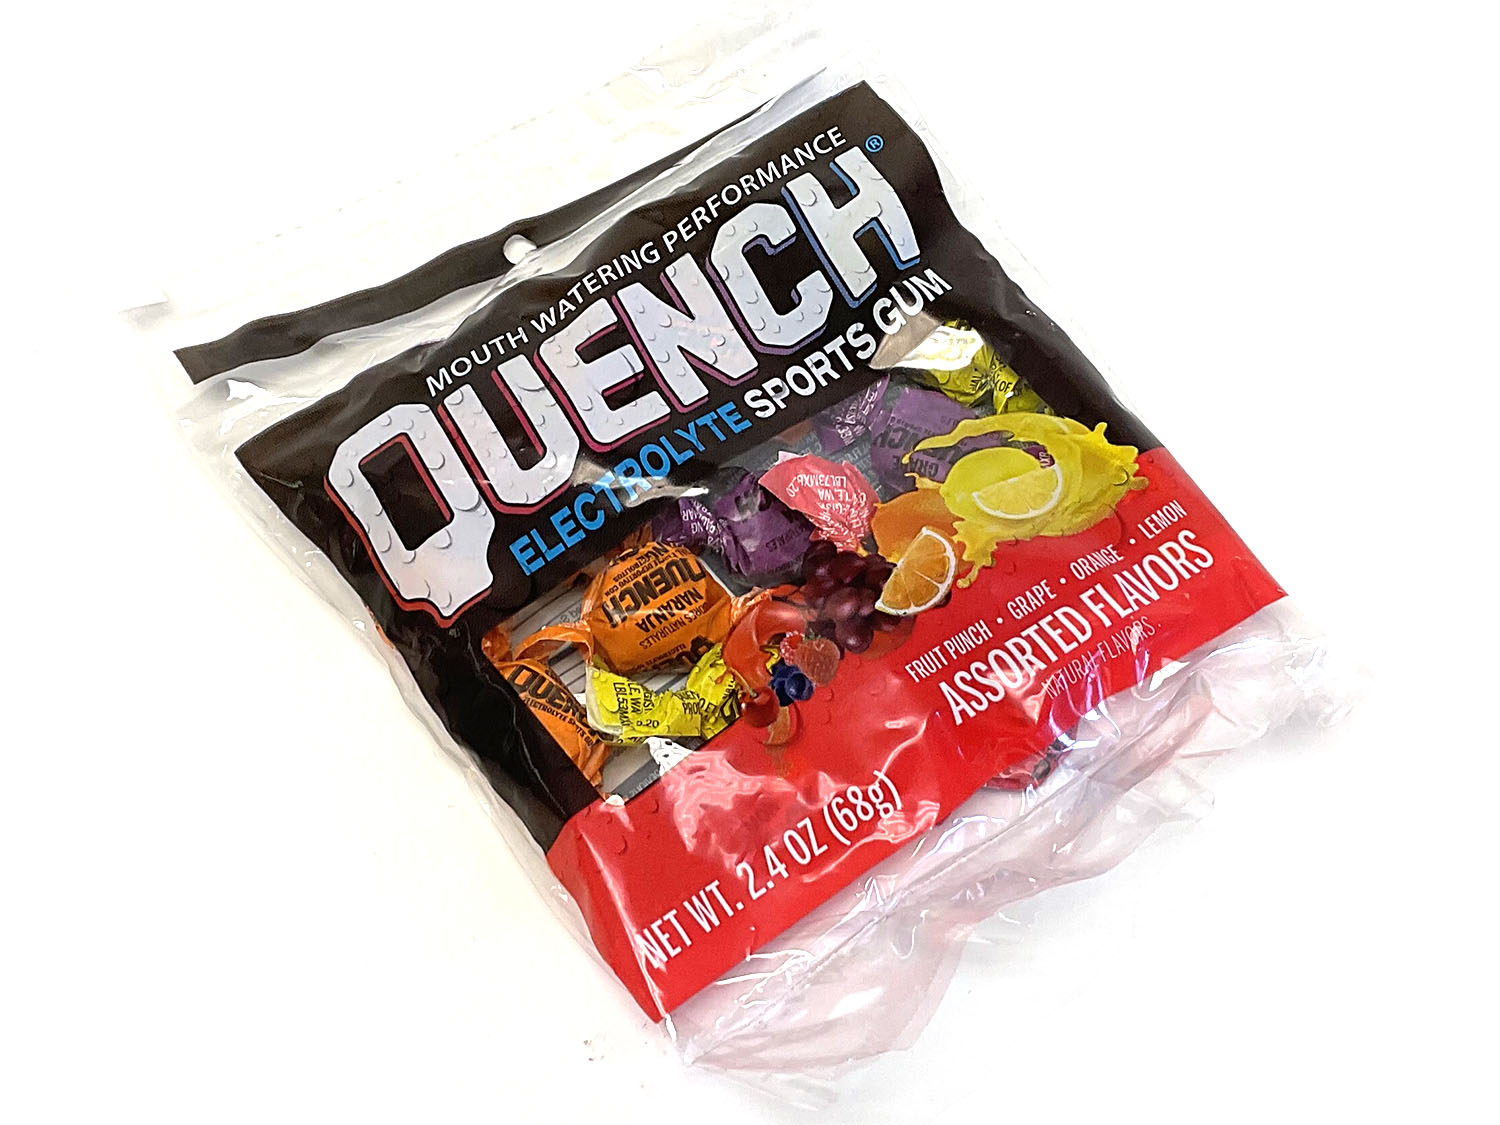 Quench Gum Assorted Flavors - 2.4 oz bag